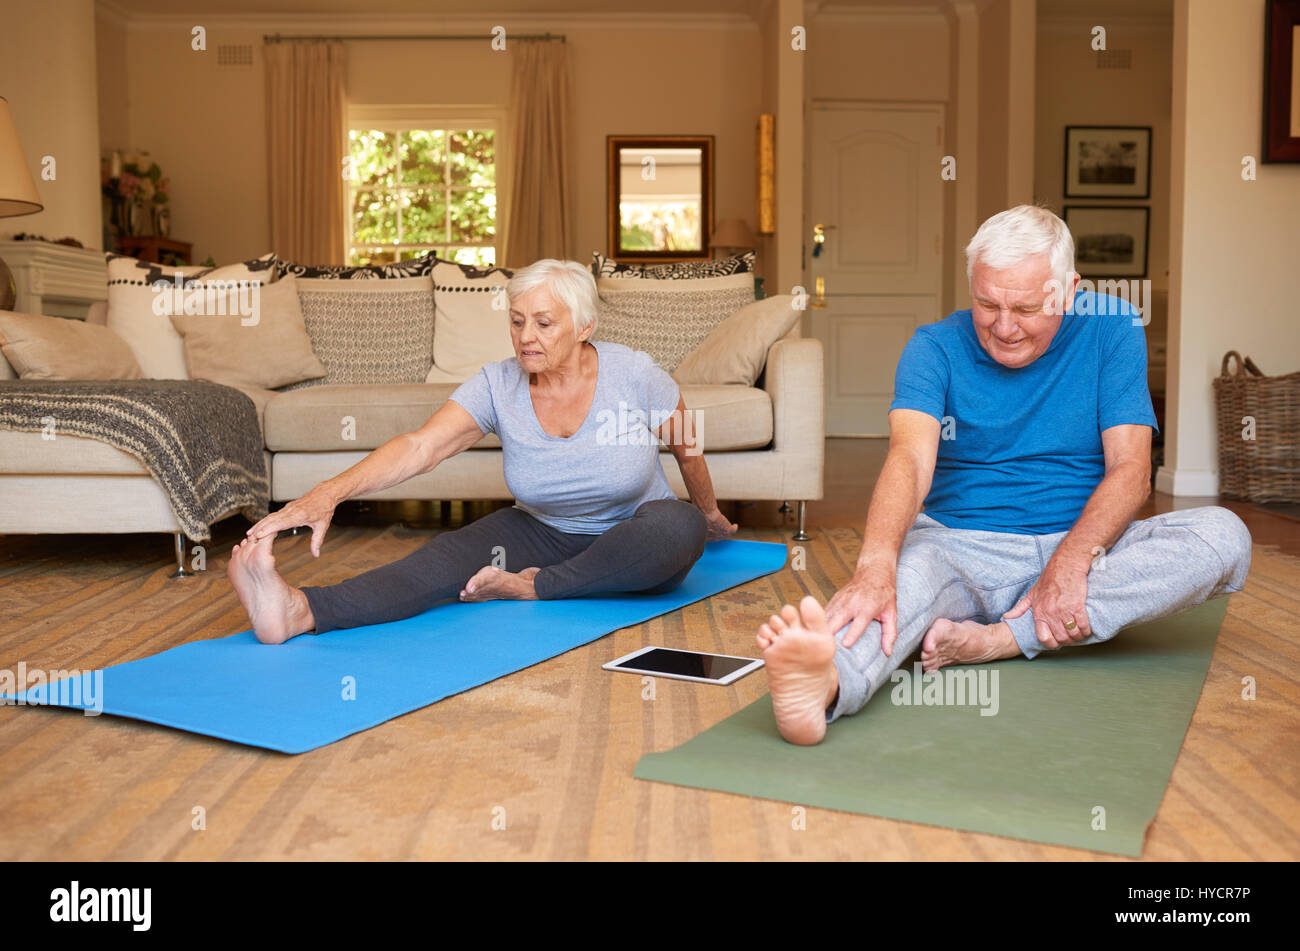 Active senior couple stretching while doing yoga together at home Stock Photo